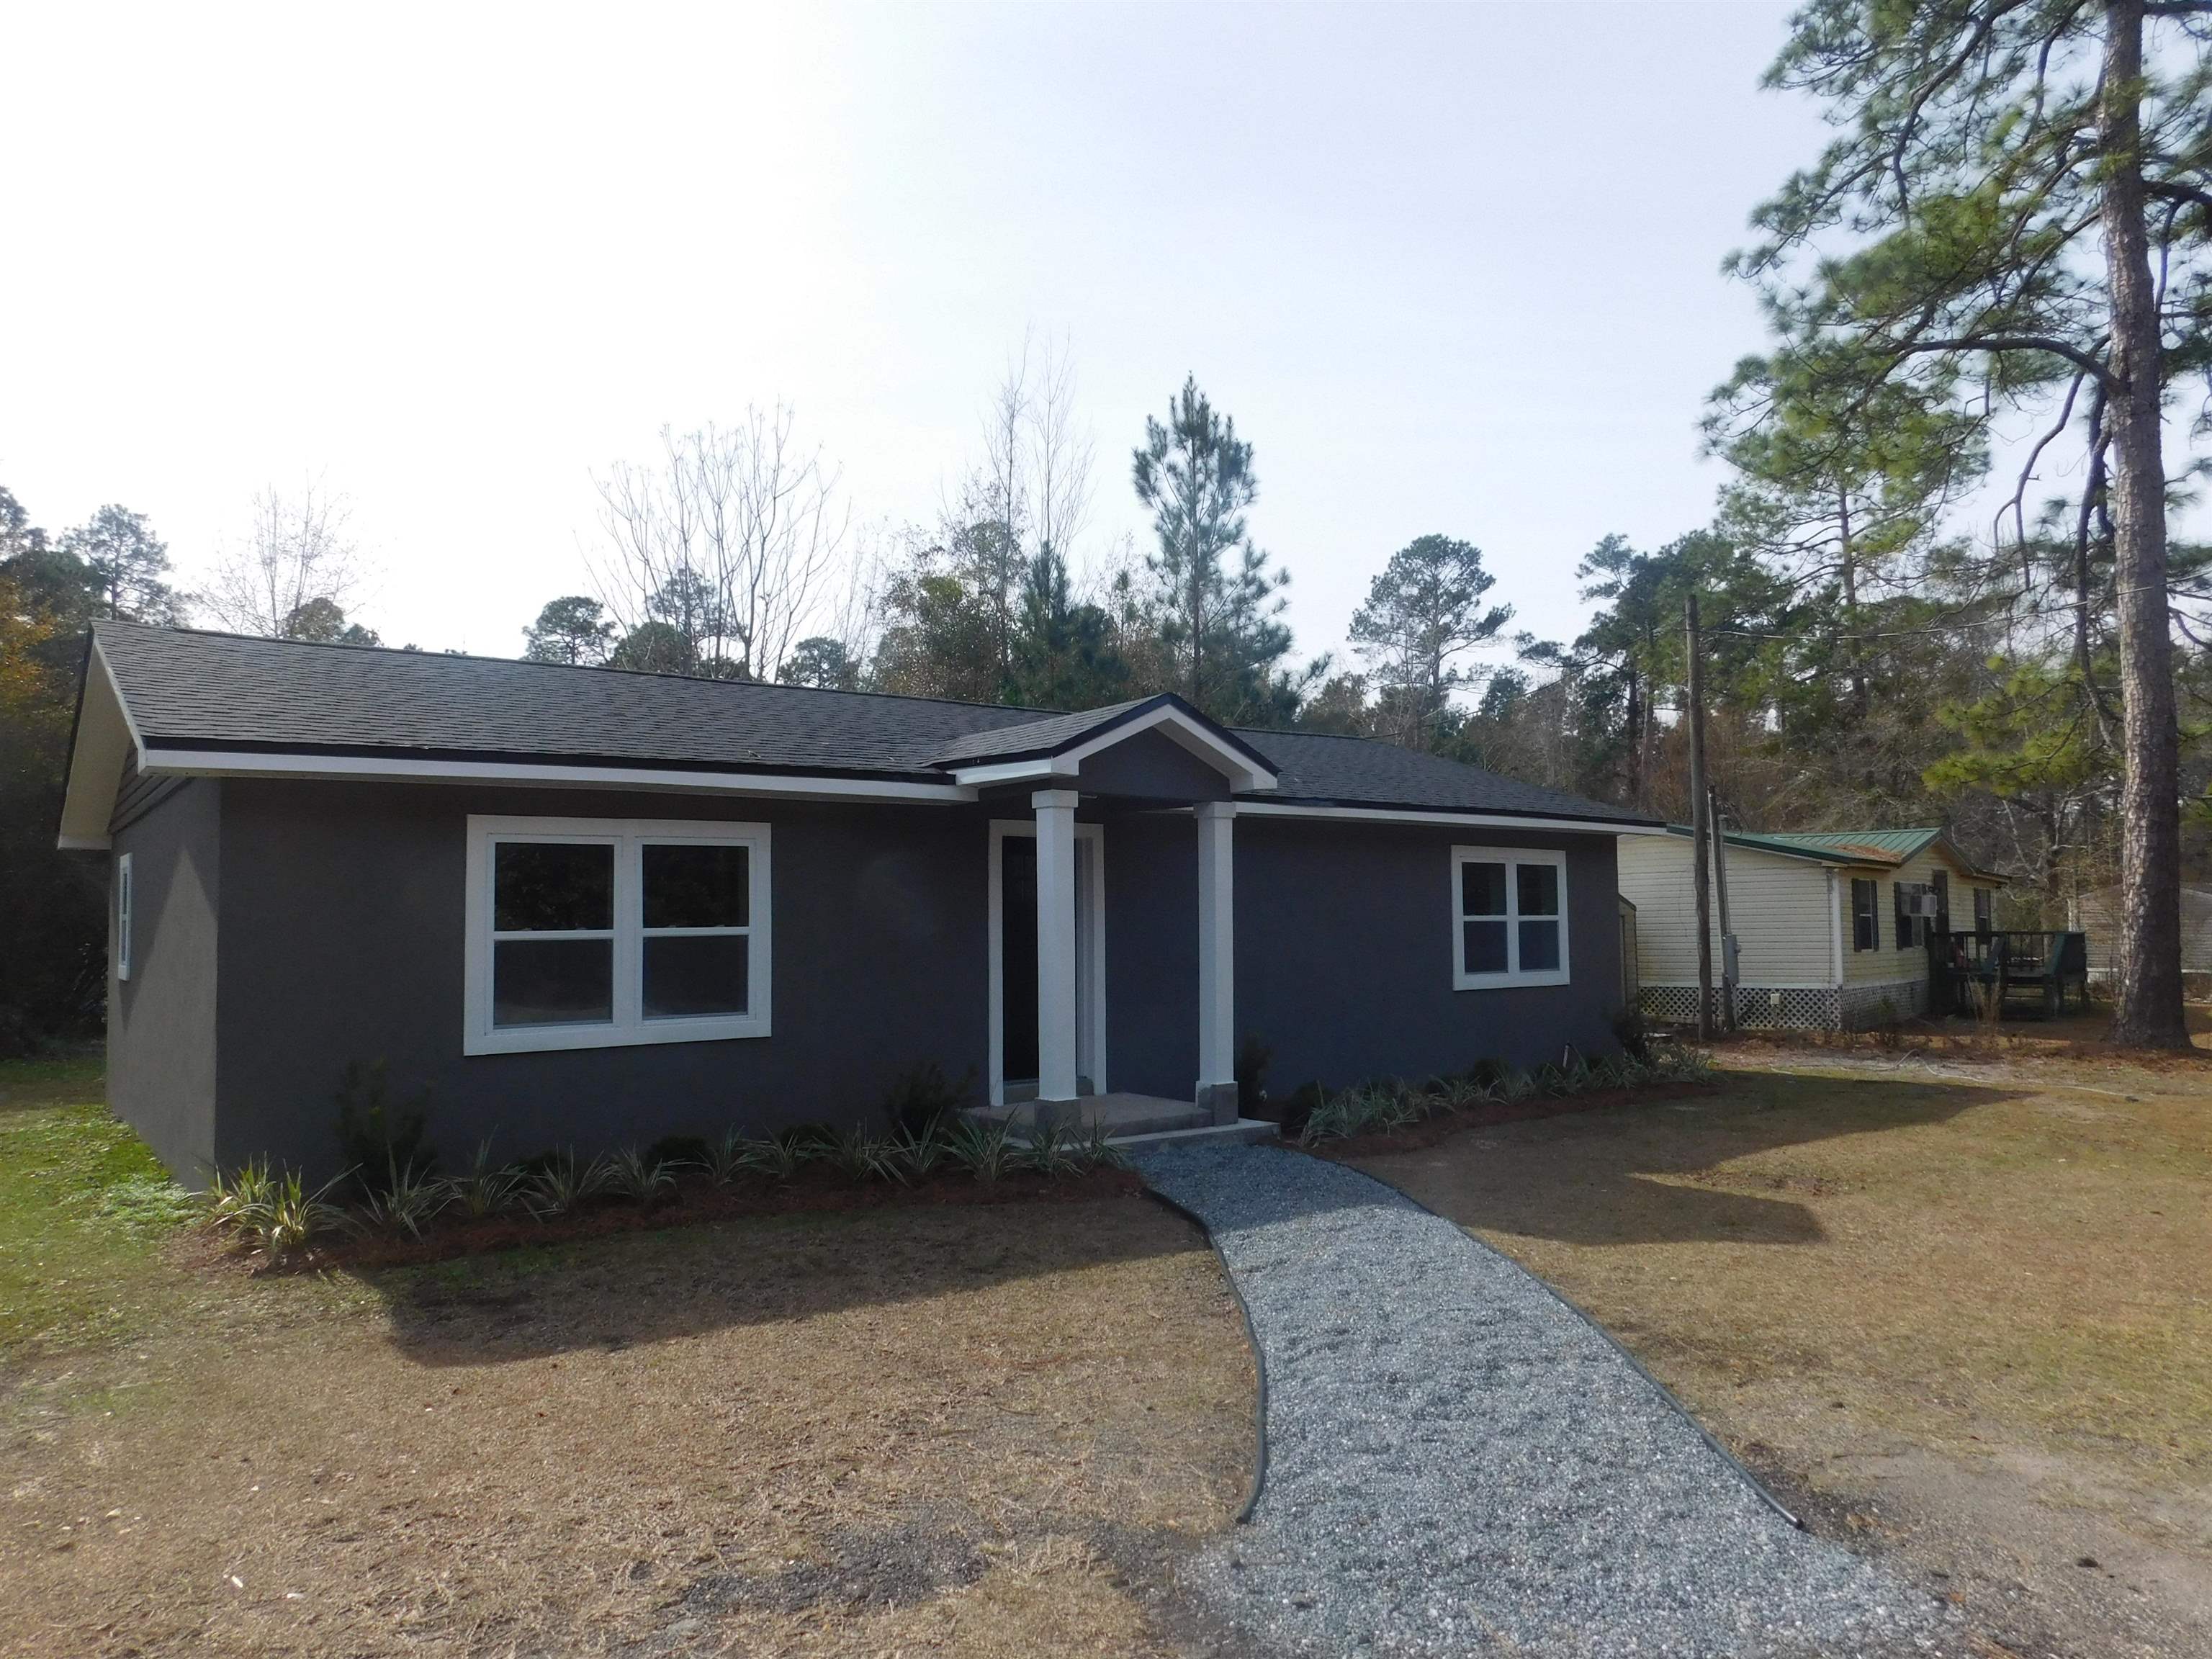 2554 PROVIDENCE Road, QUINCY, FL 32351